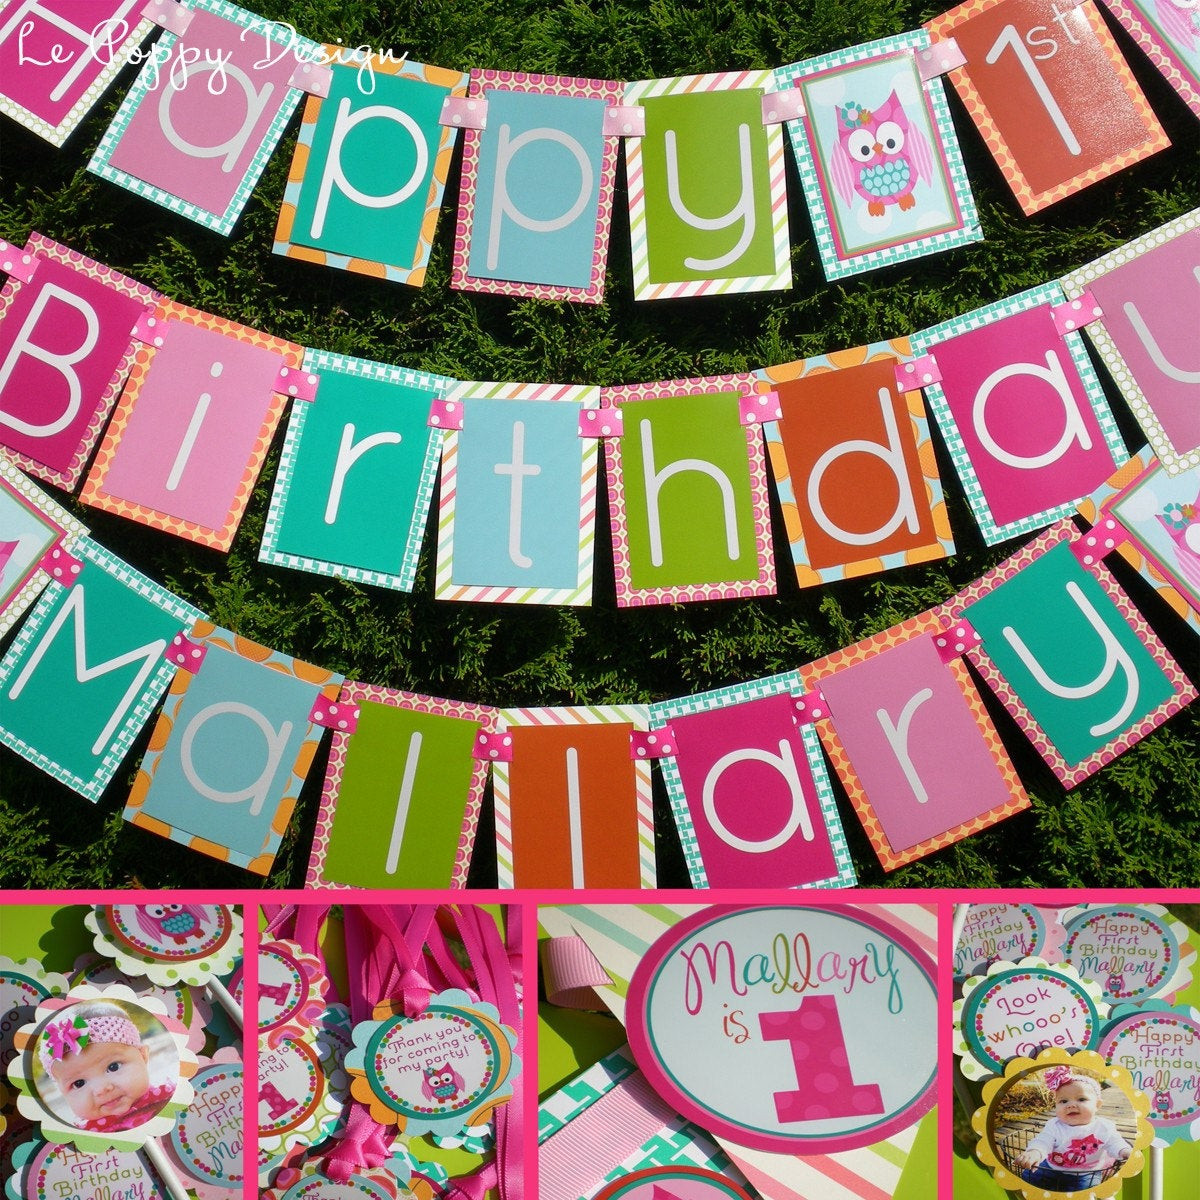 Owl Birthday Party Decorations
 Owl Birthday Party Decorations Package Look by